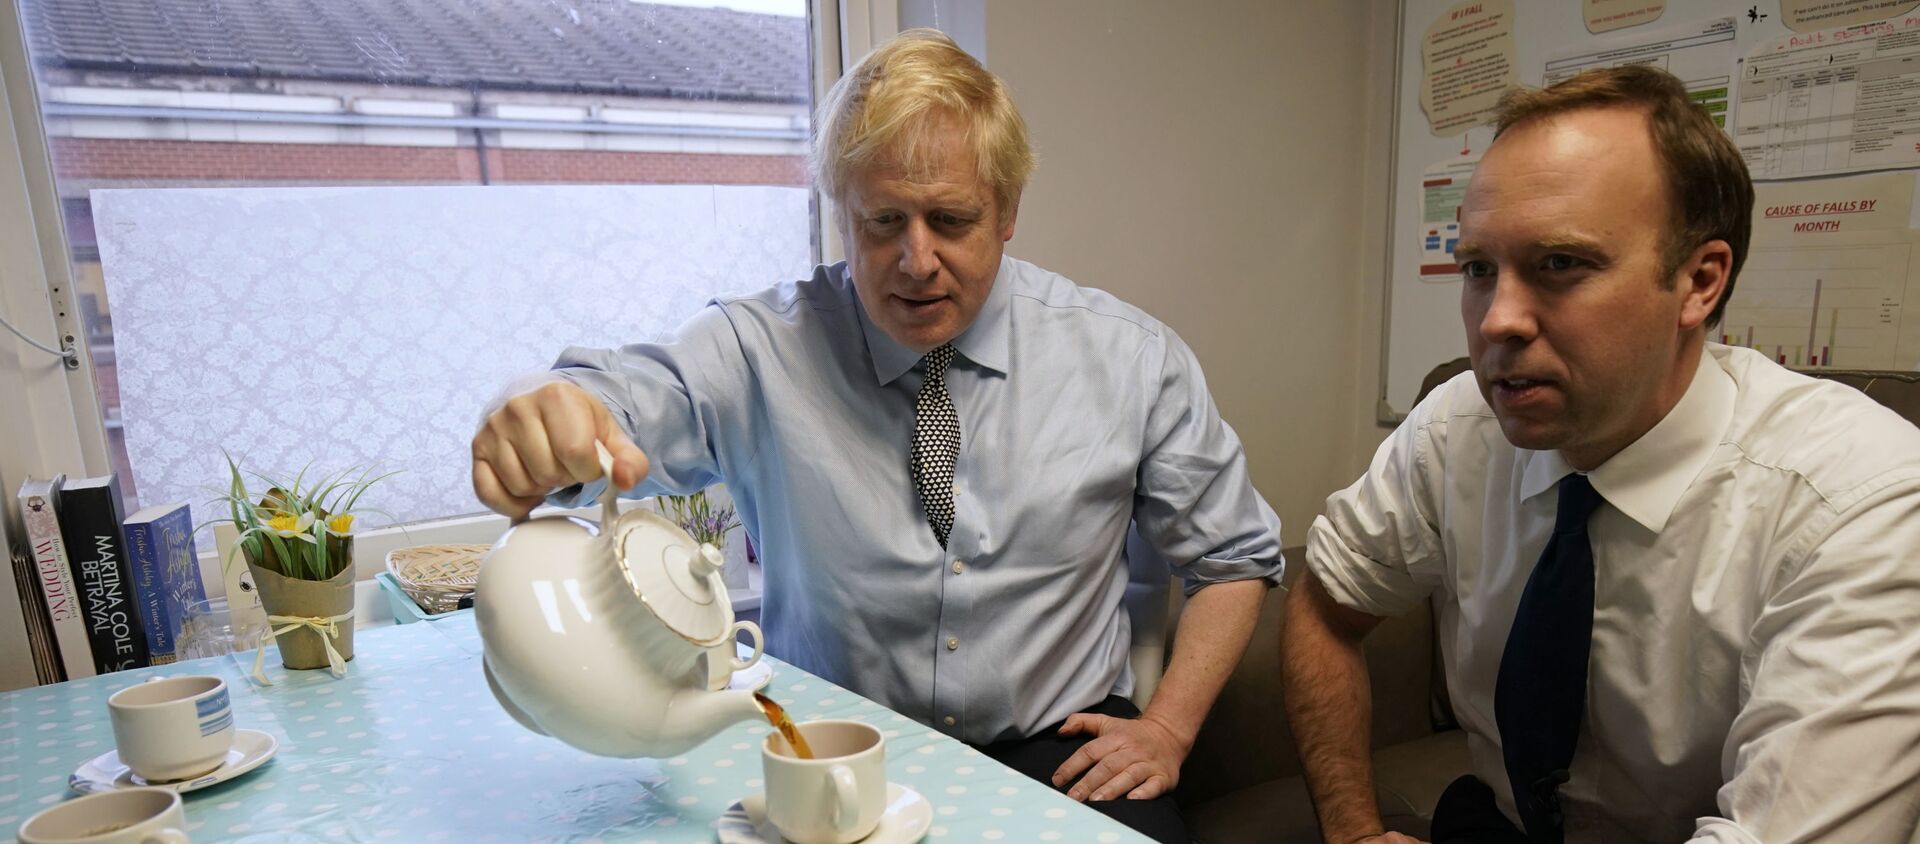 Secretary of State for Health and Social Care Matt Hancock, right, and Prime Minister Boris Johnson have tea with members of staff as they visit Bassetlaw District General Hospital, during their General Election campaign in Worksop, England, Friday, Nov. 22, 2019.  - Sputnik International, 1920, 18.06.2021